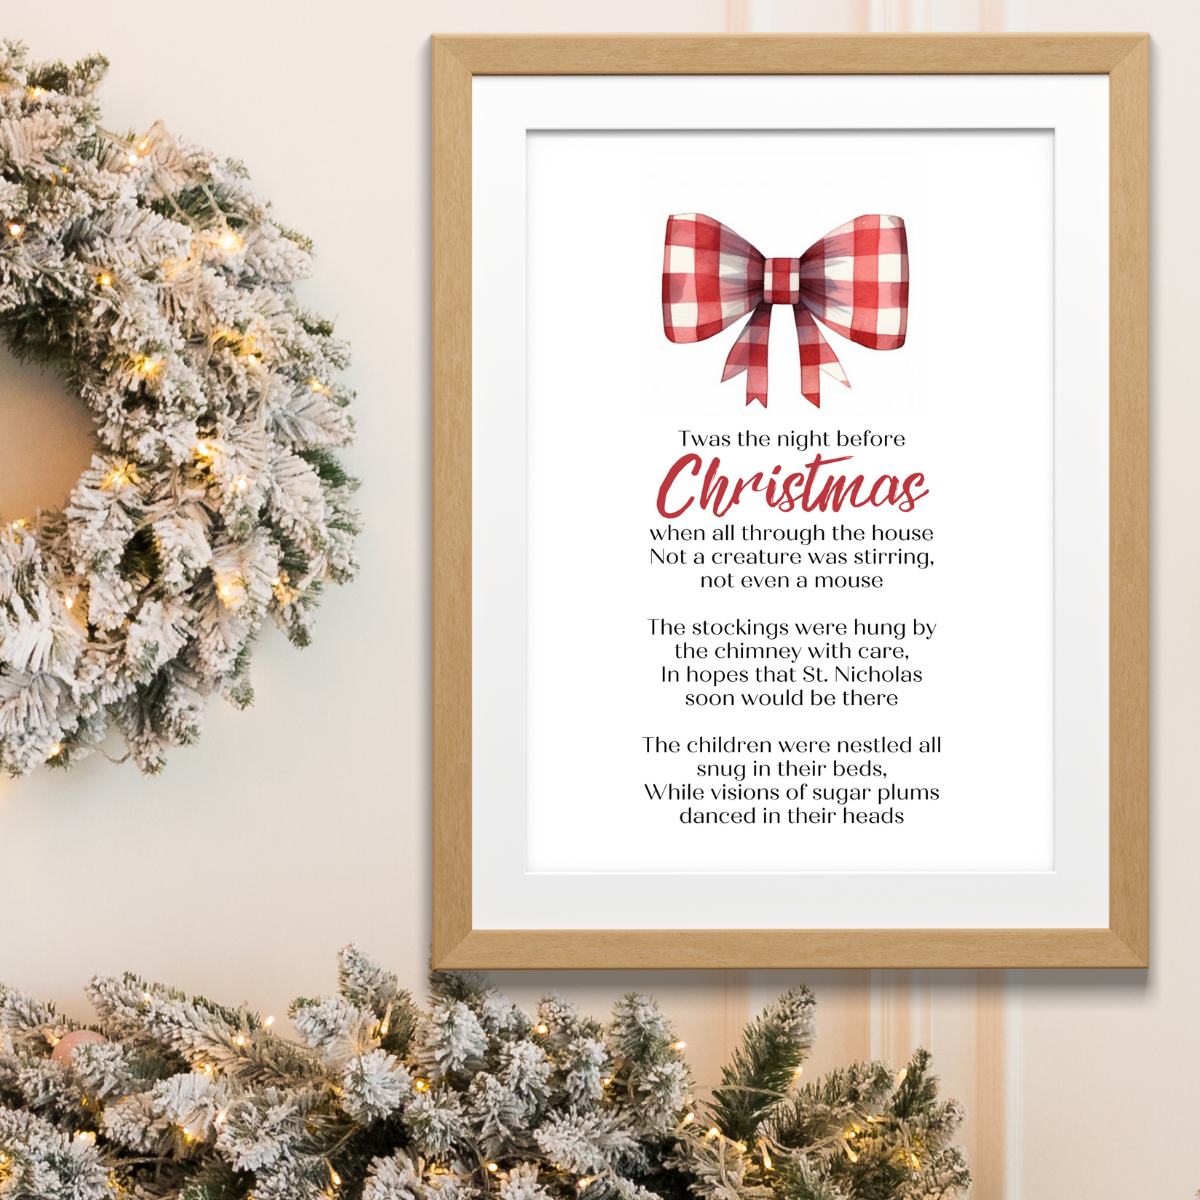 Twas the Night Before Christmas Printable Poster in wood frame for DIY home Decor next to pretty festive wreath fireplace